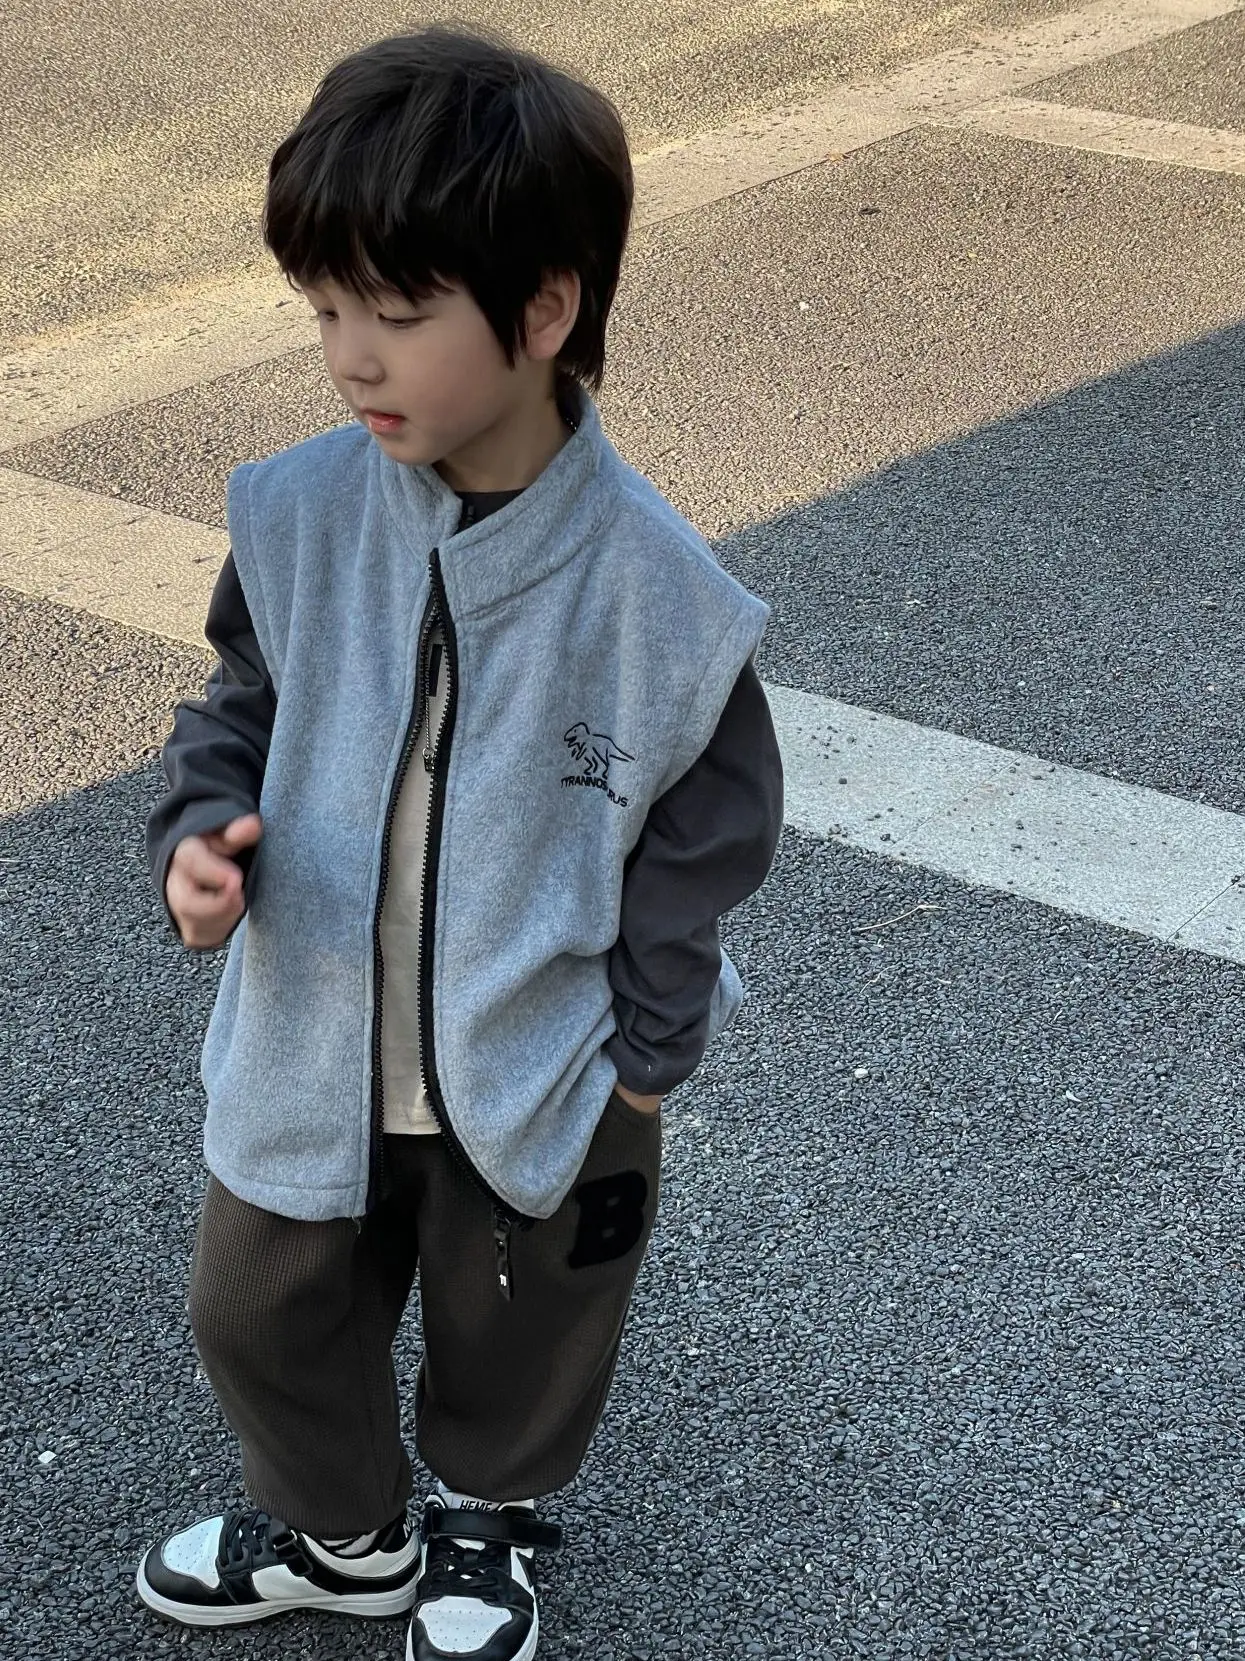 2023 Korean Style Boys' Vest Outerwear Outdoor Casual Wear New Baby Top for Spring and Autumn from 2 to 14 Years Old enlarge